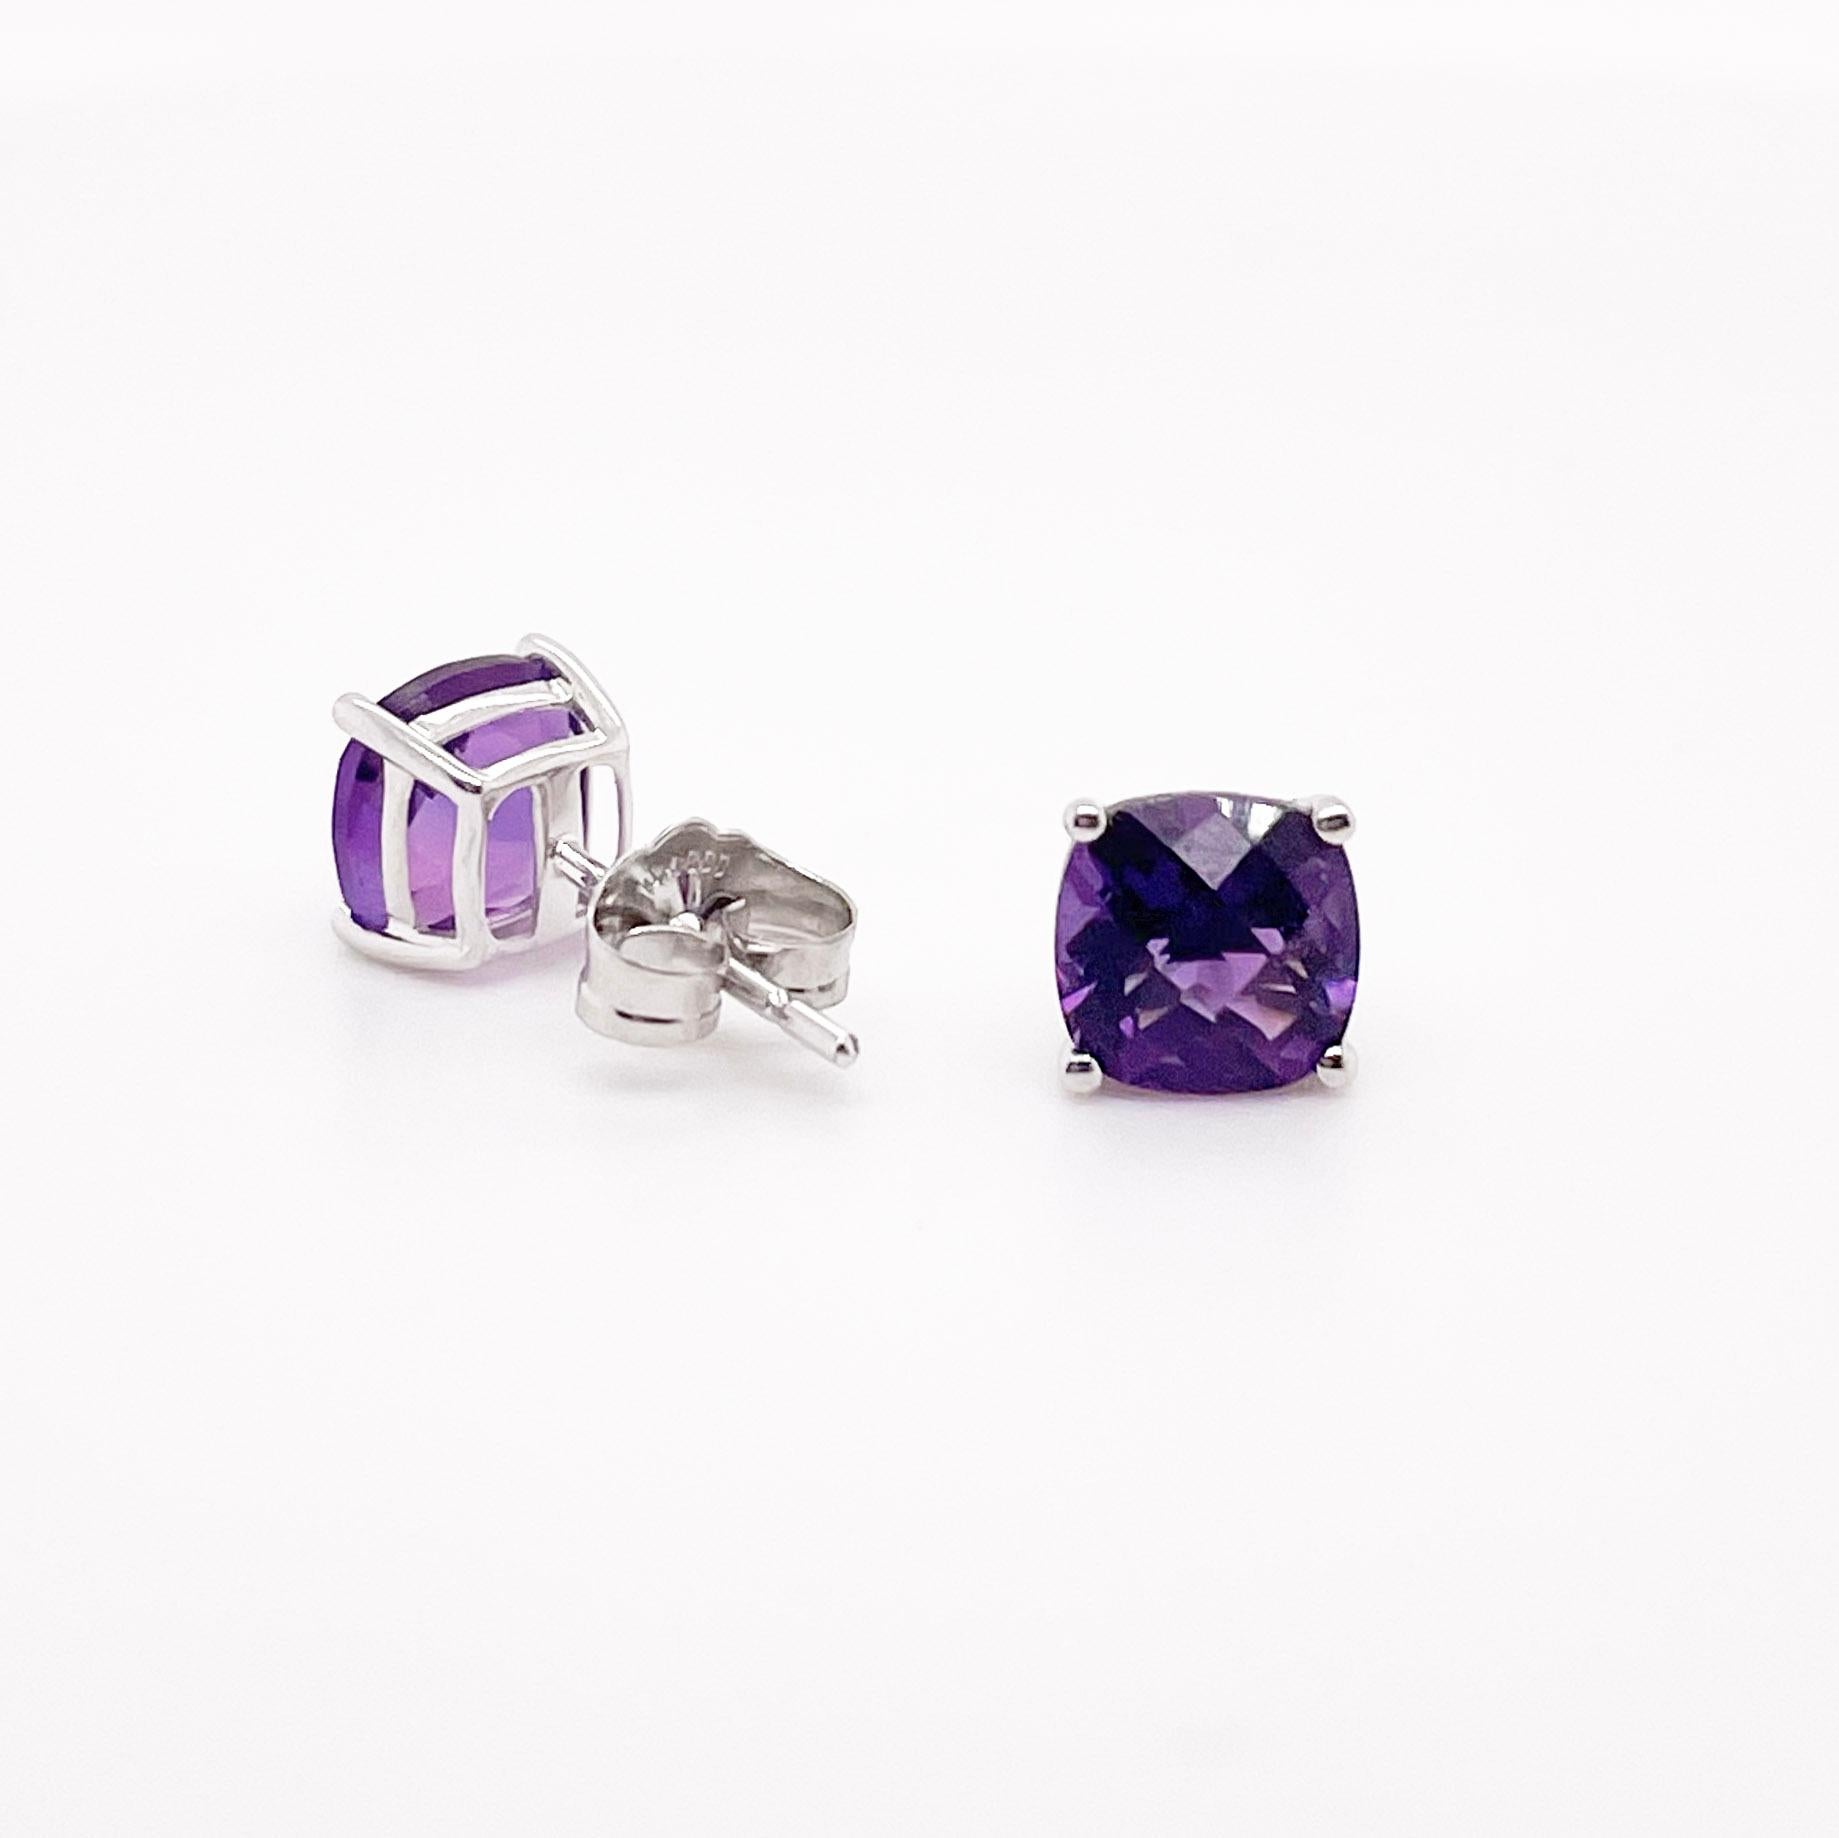 The details for these gorgeous earrings are listed below:
1 Set
Metal Quality: 14K White Gold
Earring Type: Stud
Gemstone: Amethyst
Gemstone Color: Purple
Measurements: 6 mm x 6 mm Cushion Shape
Gemstone Total Carat Weight: 1.50 carats
Post Type: